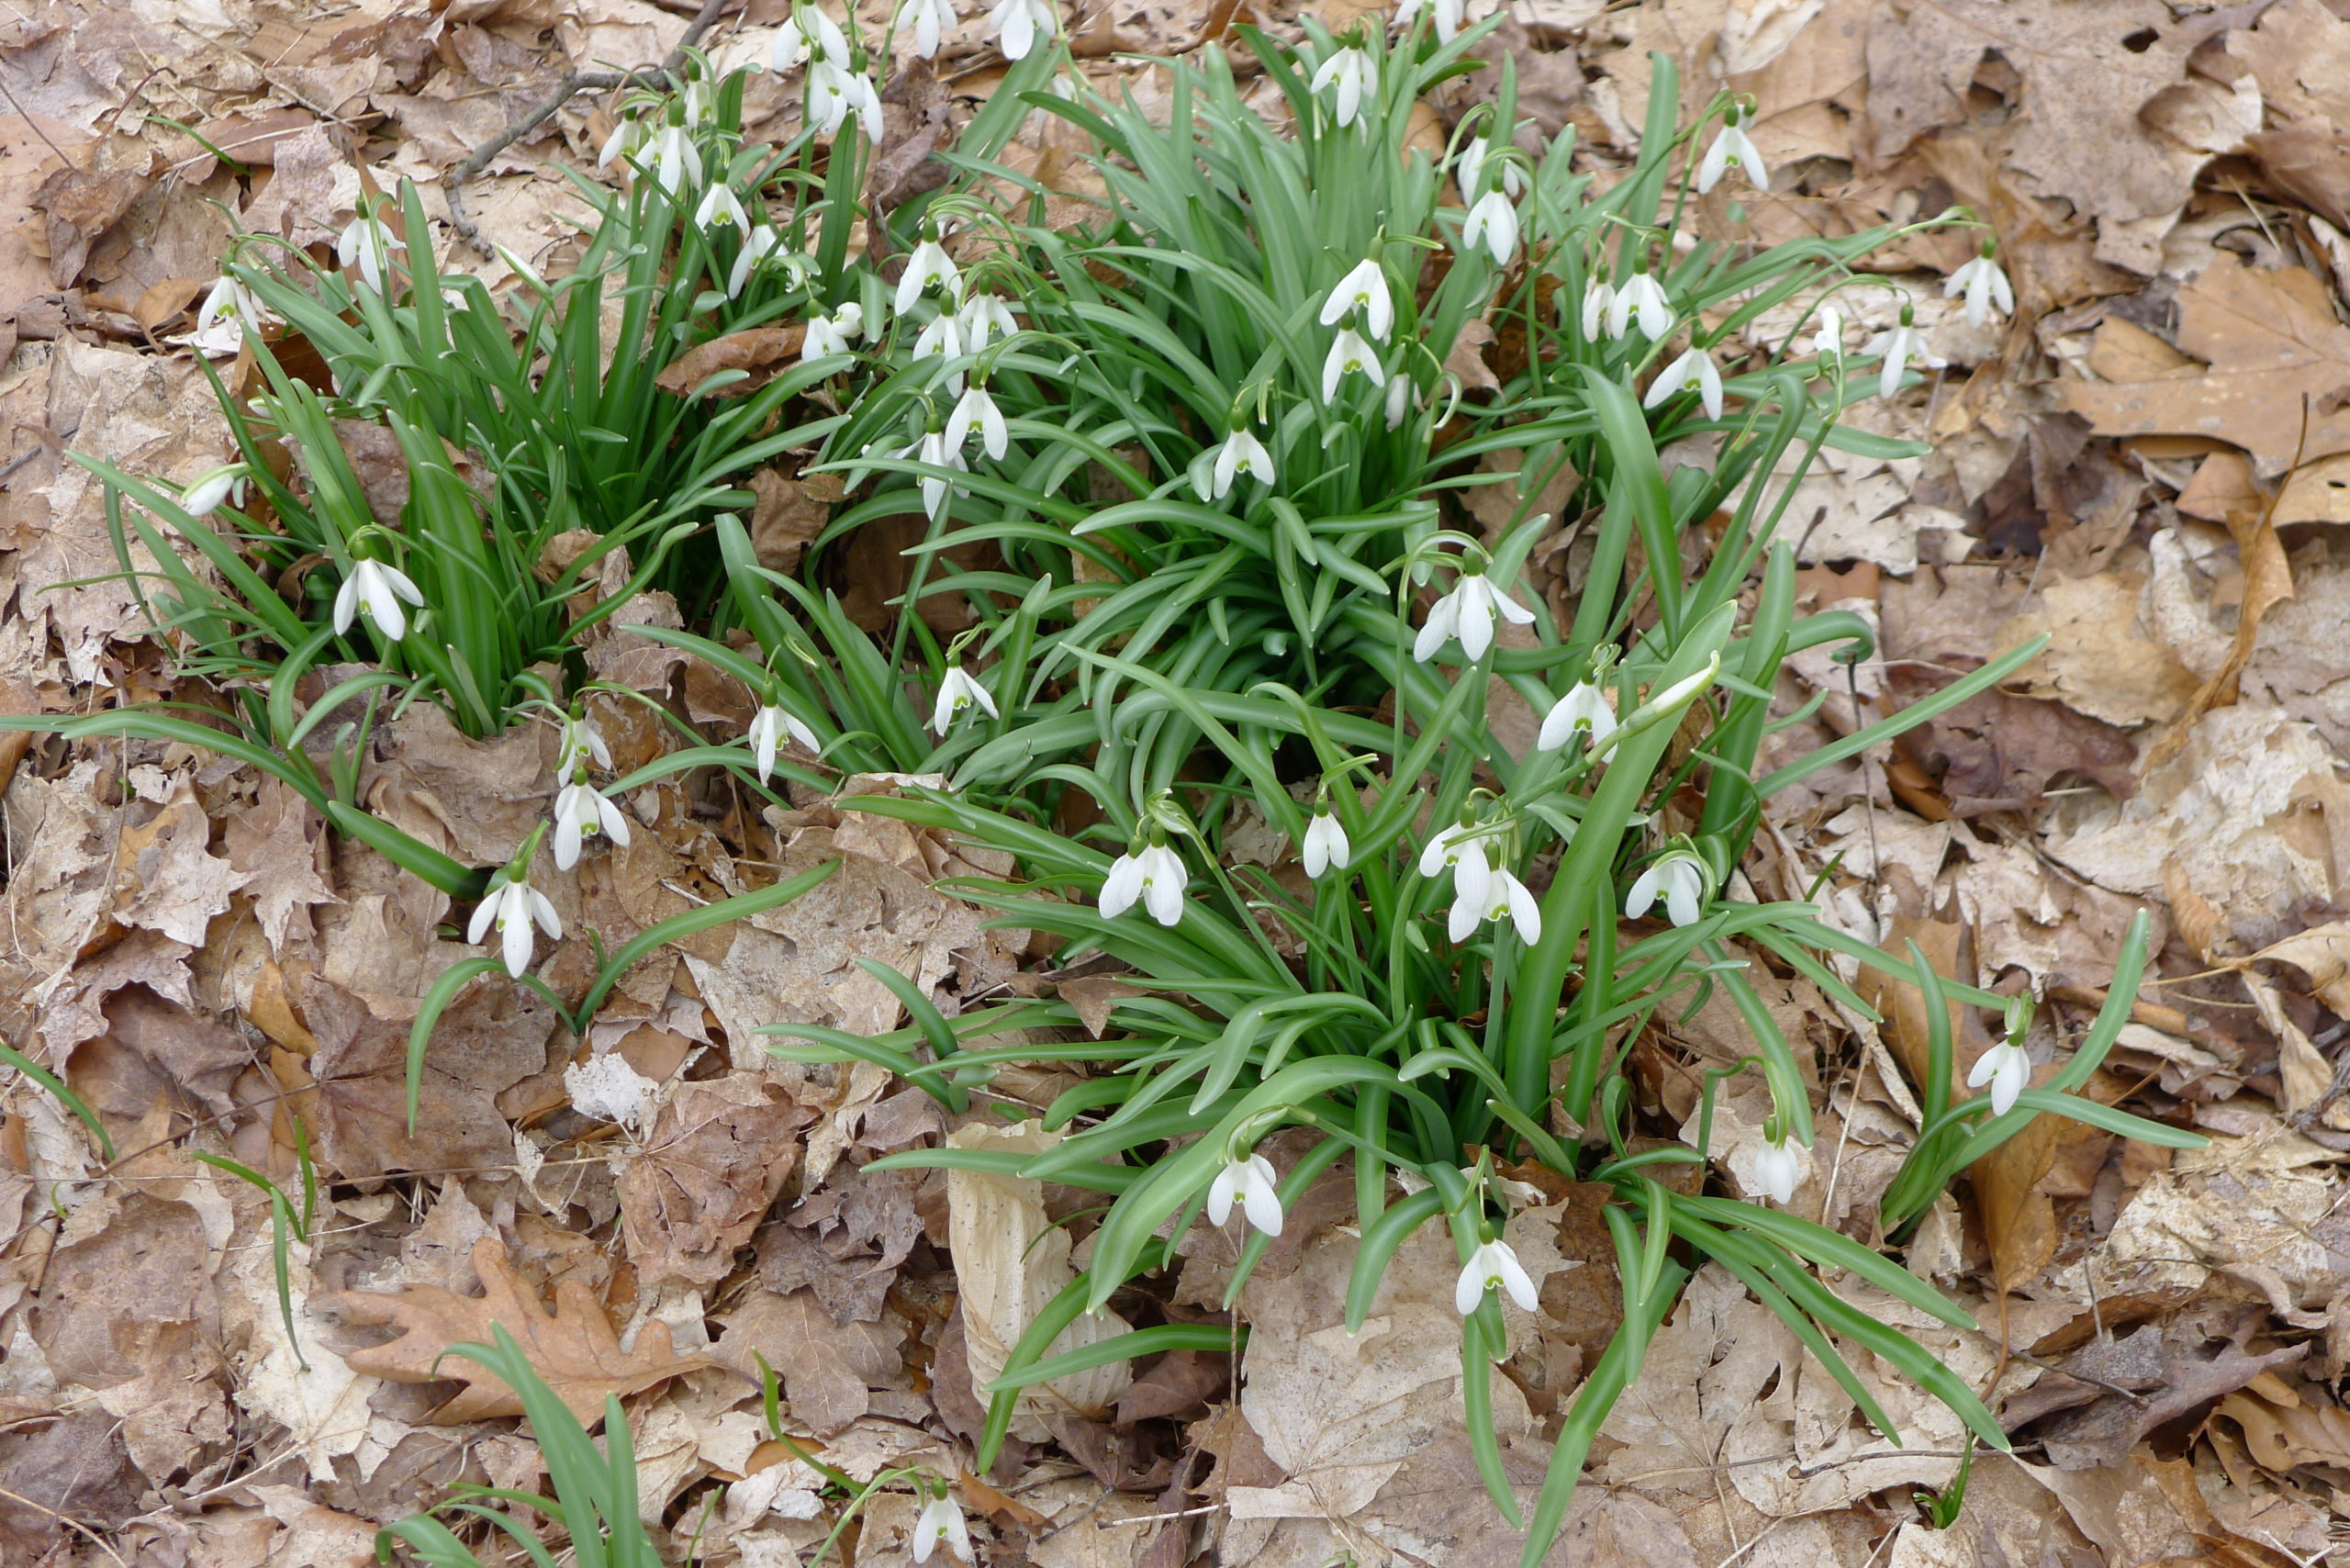 In late March into early April (or sooner on the southern side of a house) snowdrops (Galanthus) emerge. True harbingers of spring, they’re usually the first bulbs to flower and often push up through the snow. If happy, they will naturalize.